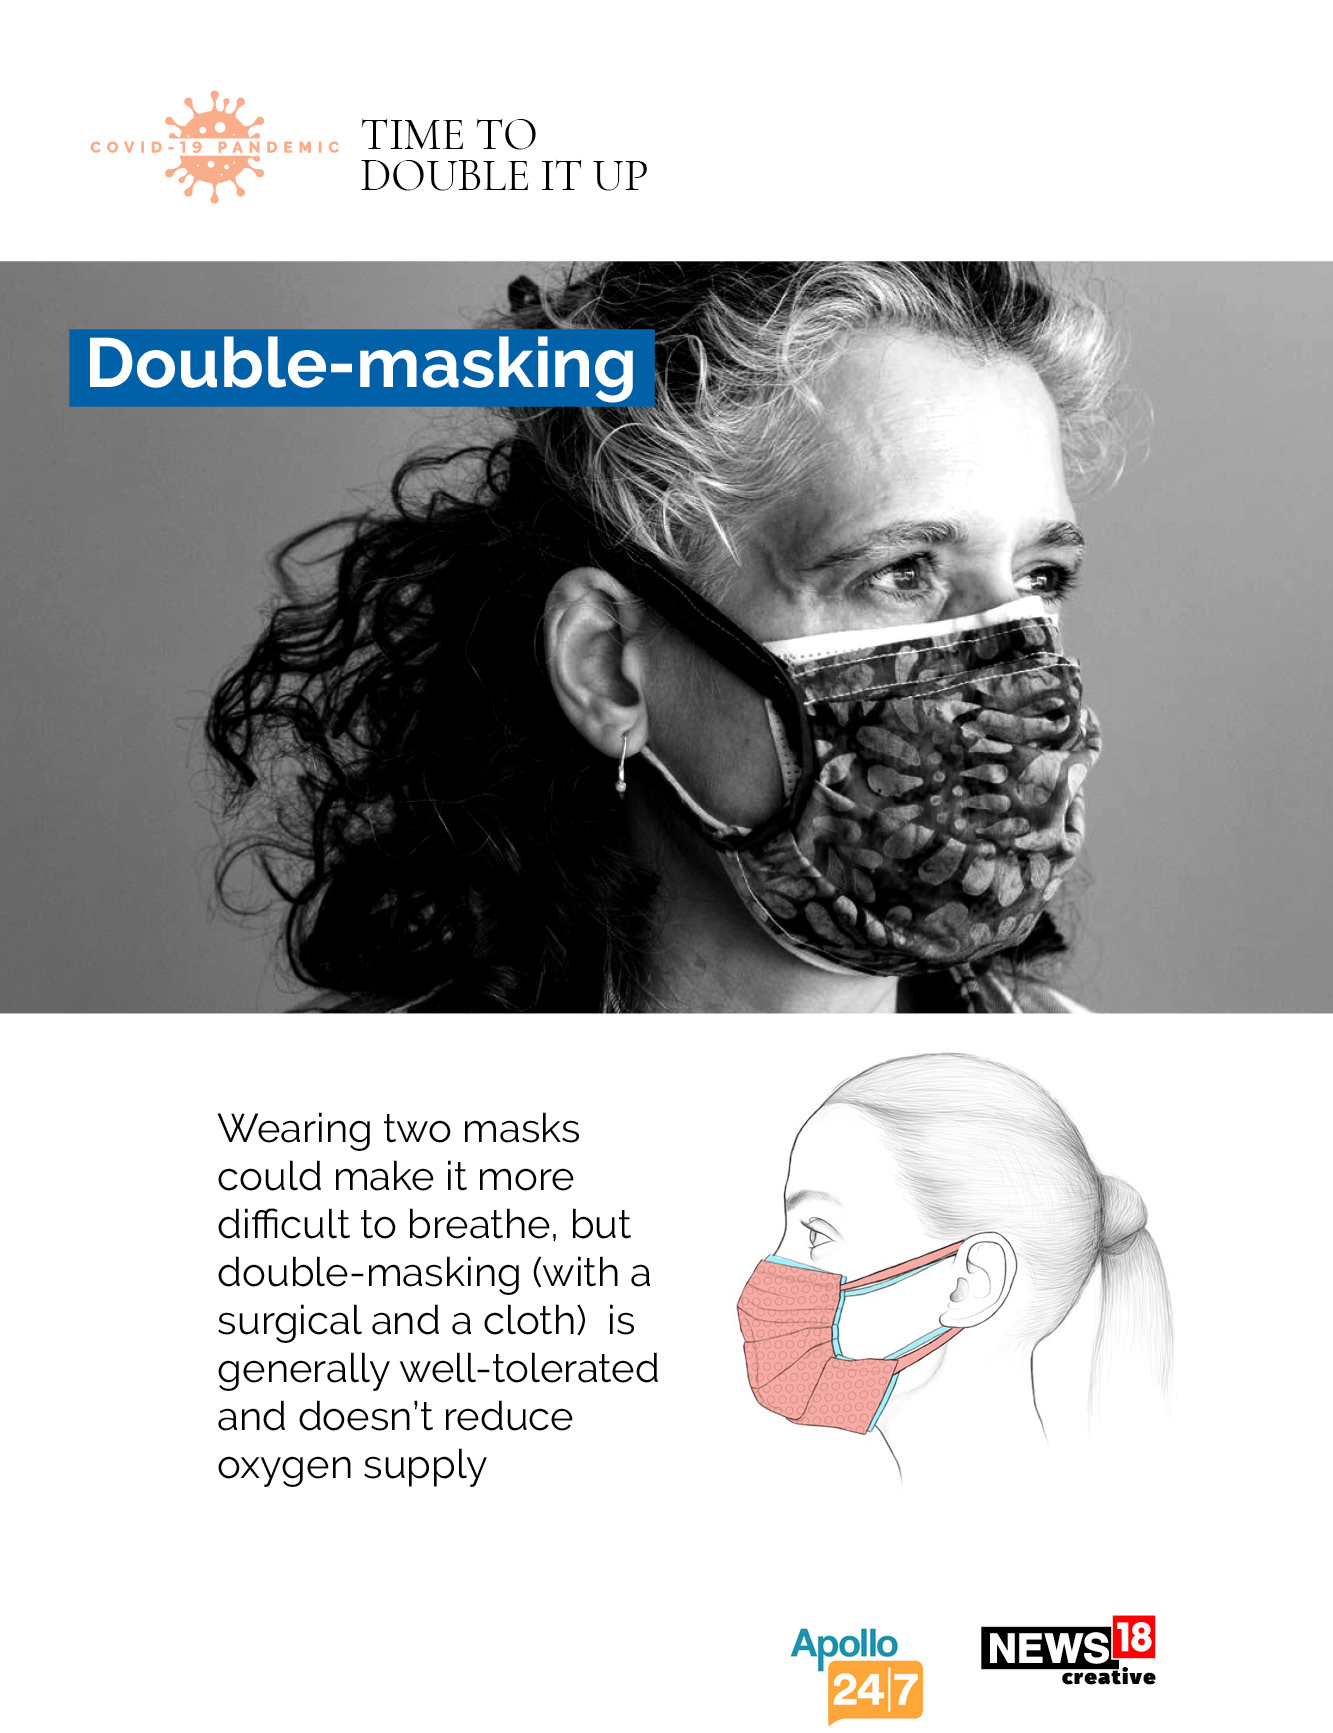 How to double mask correctly